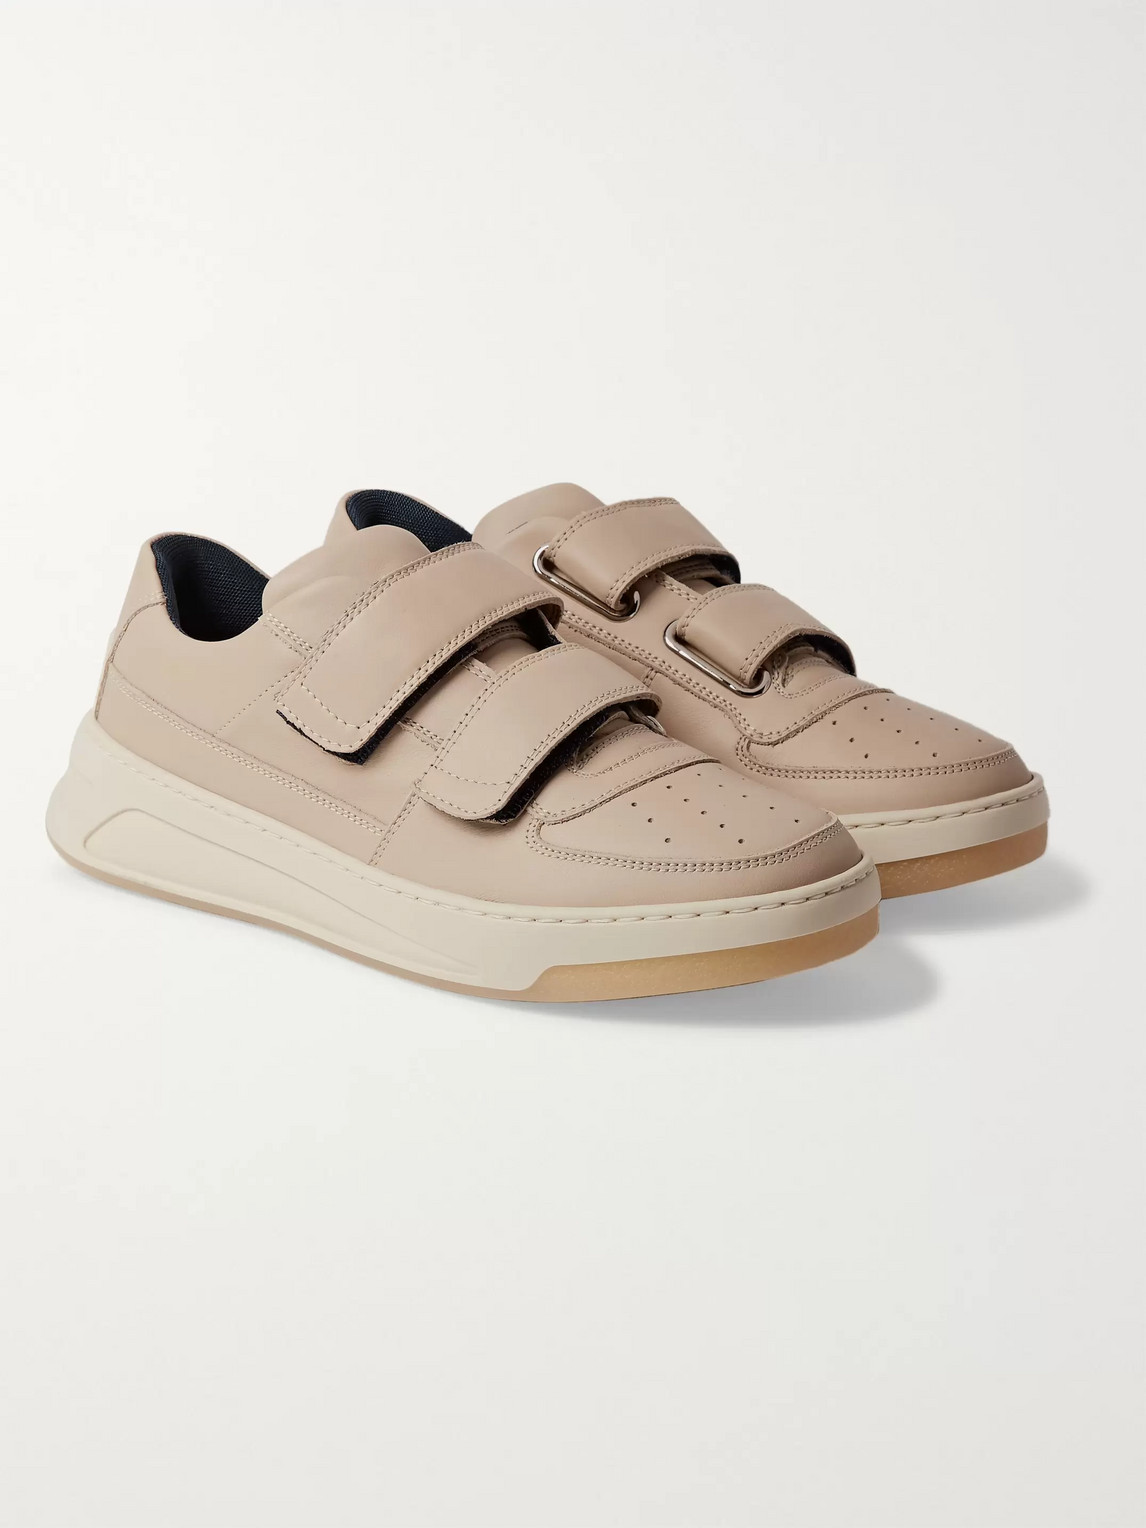 Acne Studios Leather Sneakers In Neutrals